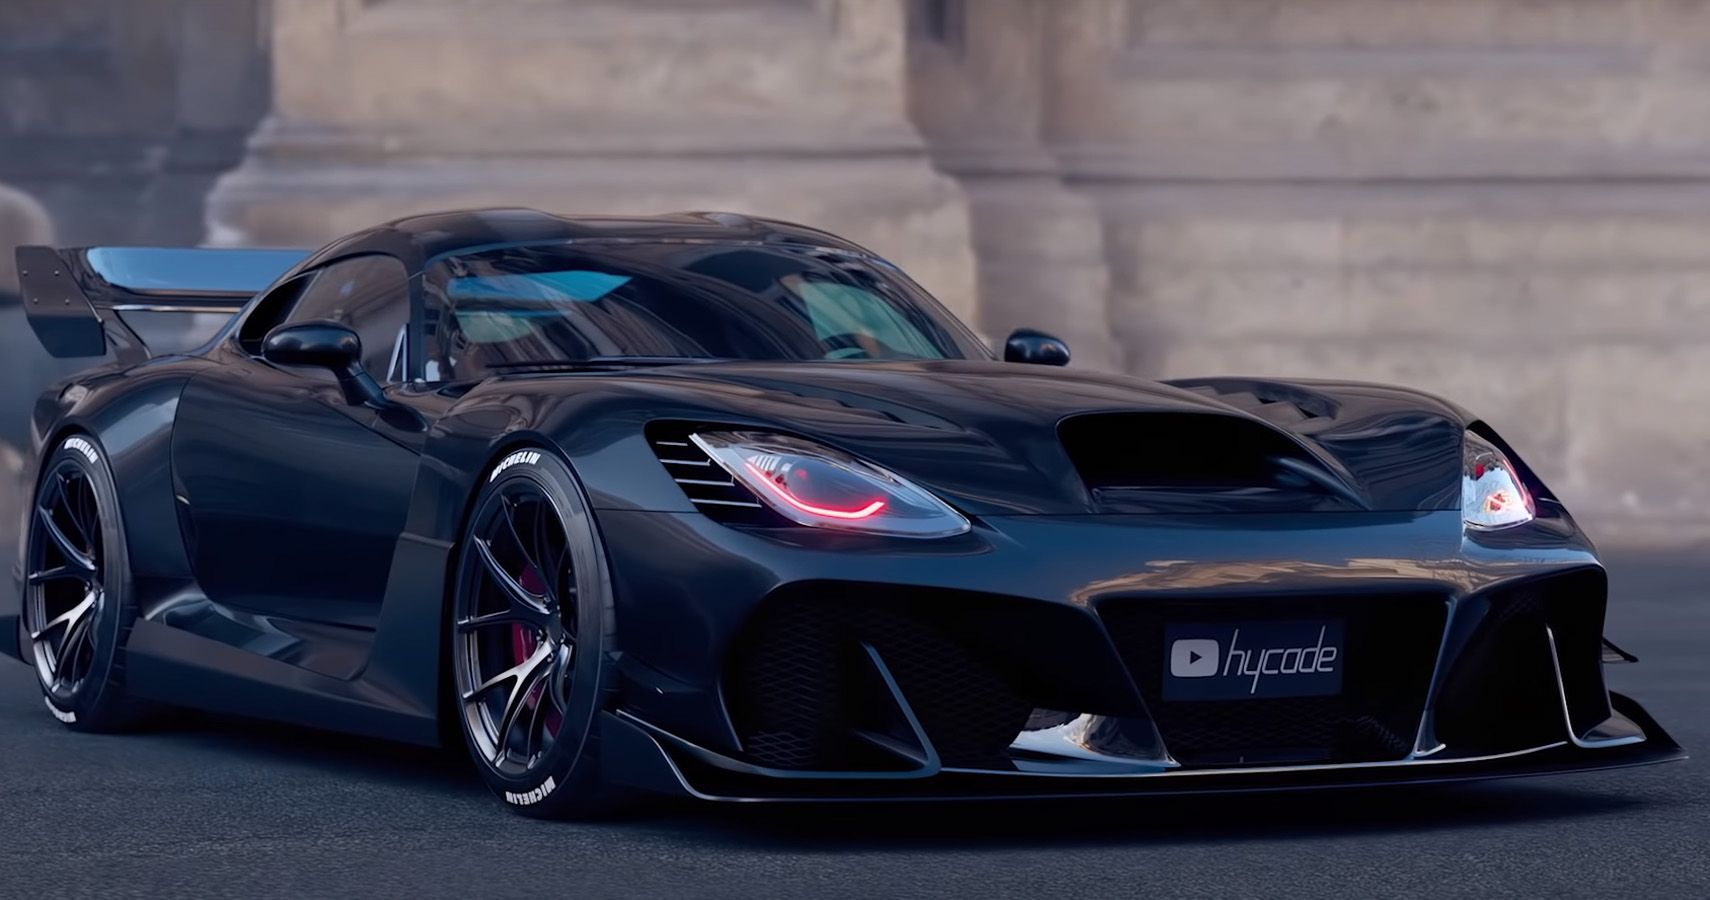 Dodge Viper Widebody Kit Is One Extreme Way To Get Attention